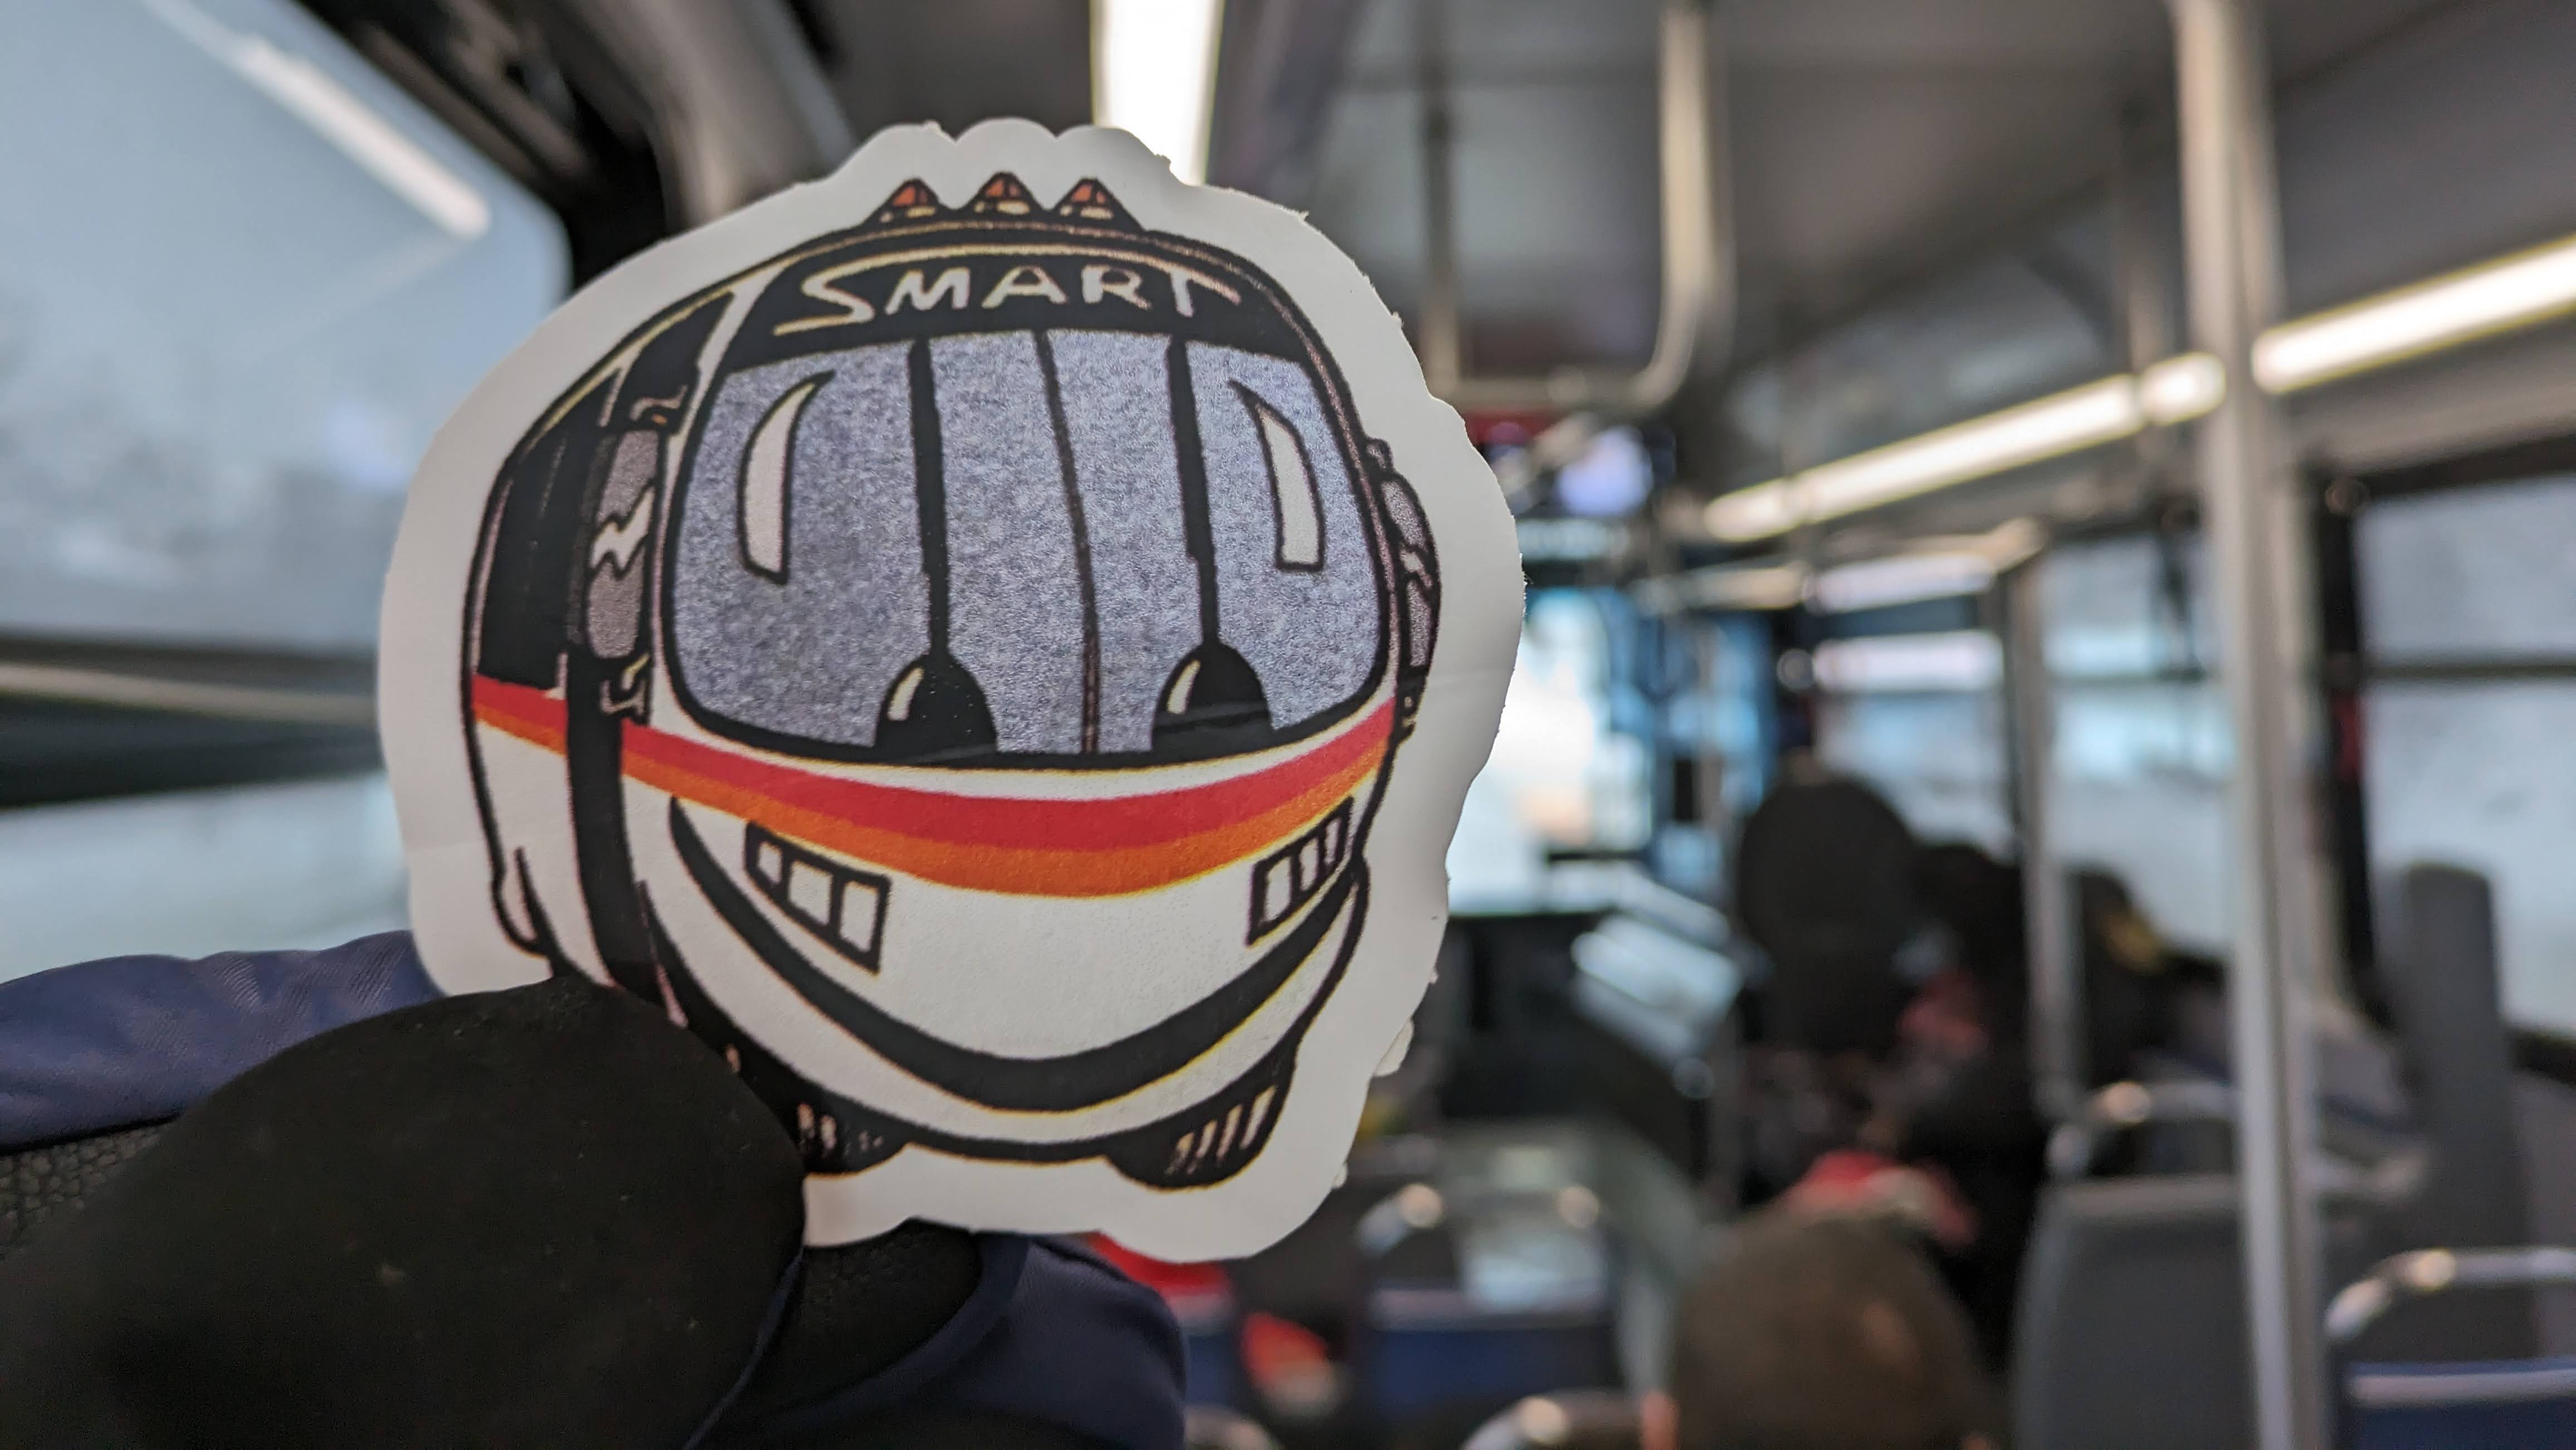 Me holding up a Smartie sticker, SMART's old anthropomorphic mascot from the 90s, on a FAST bus.